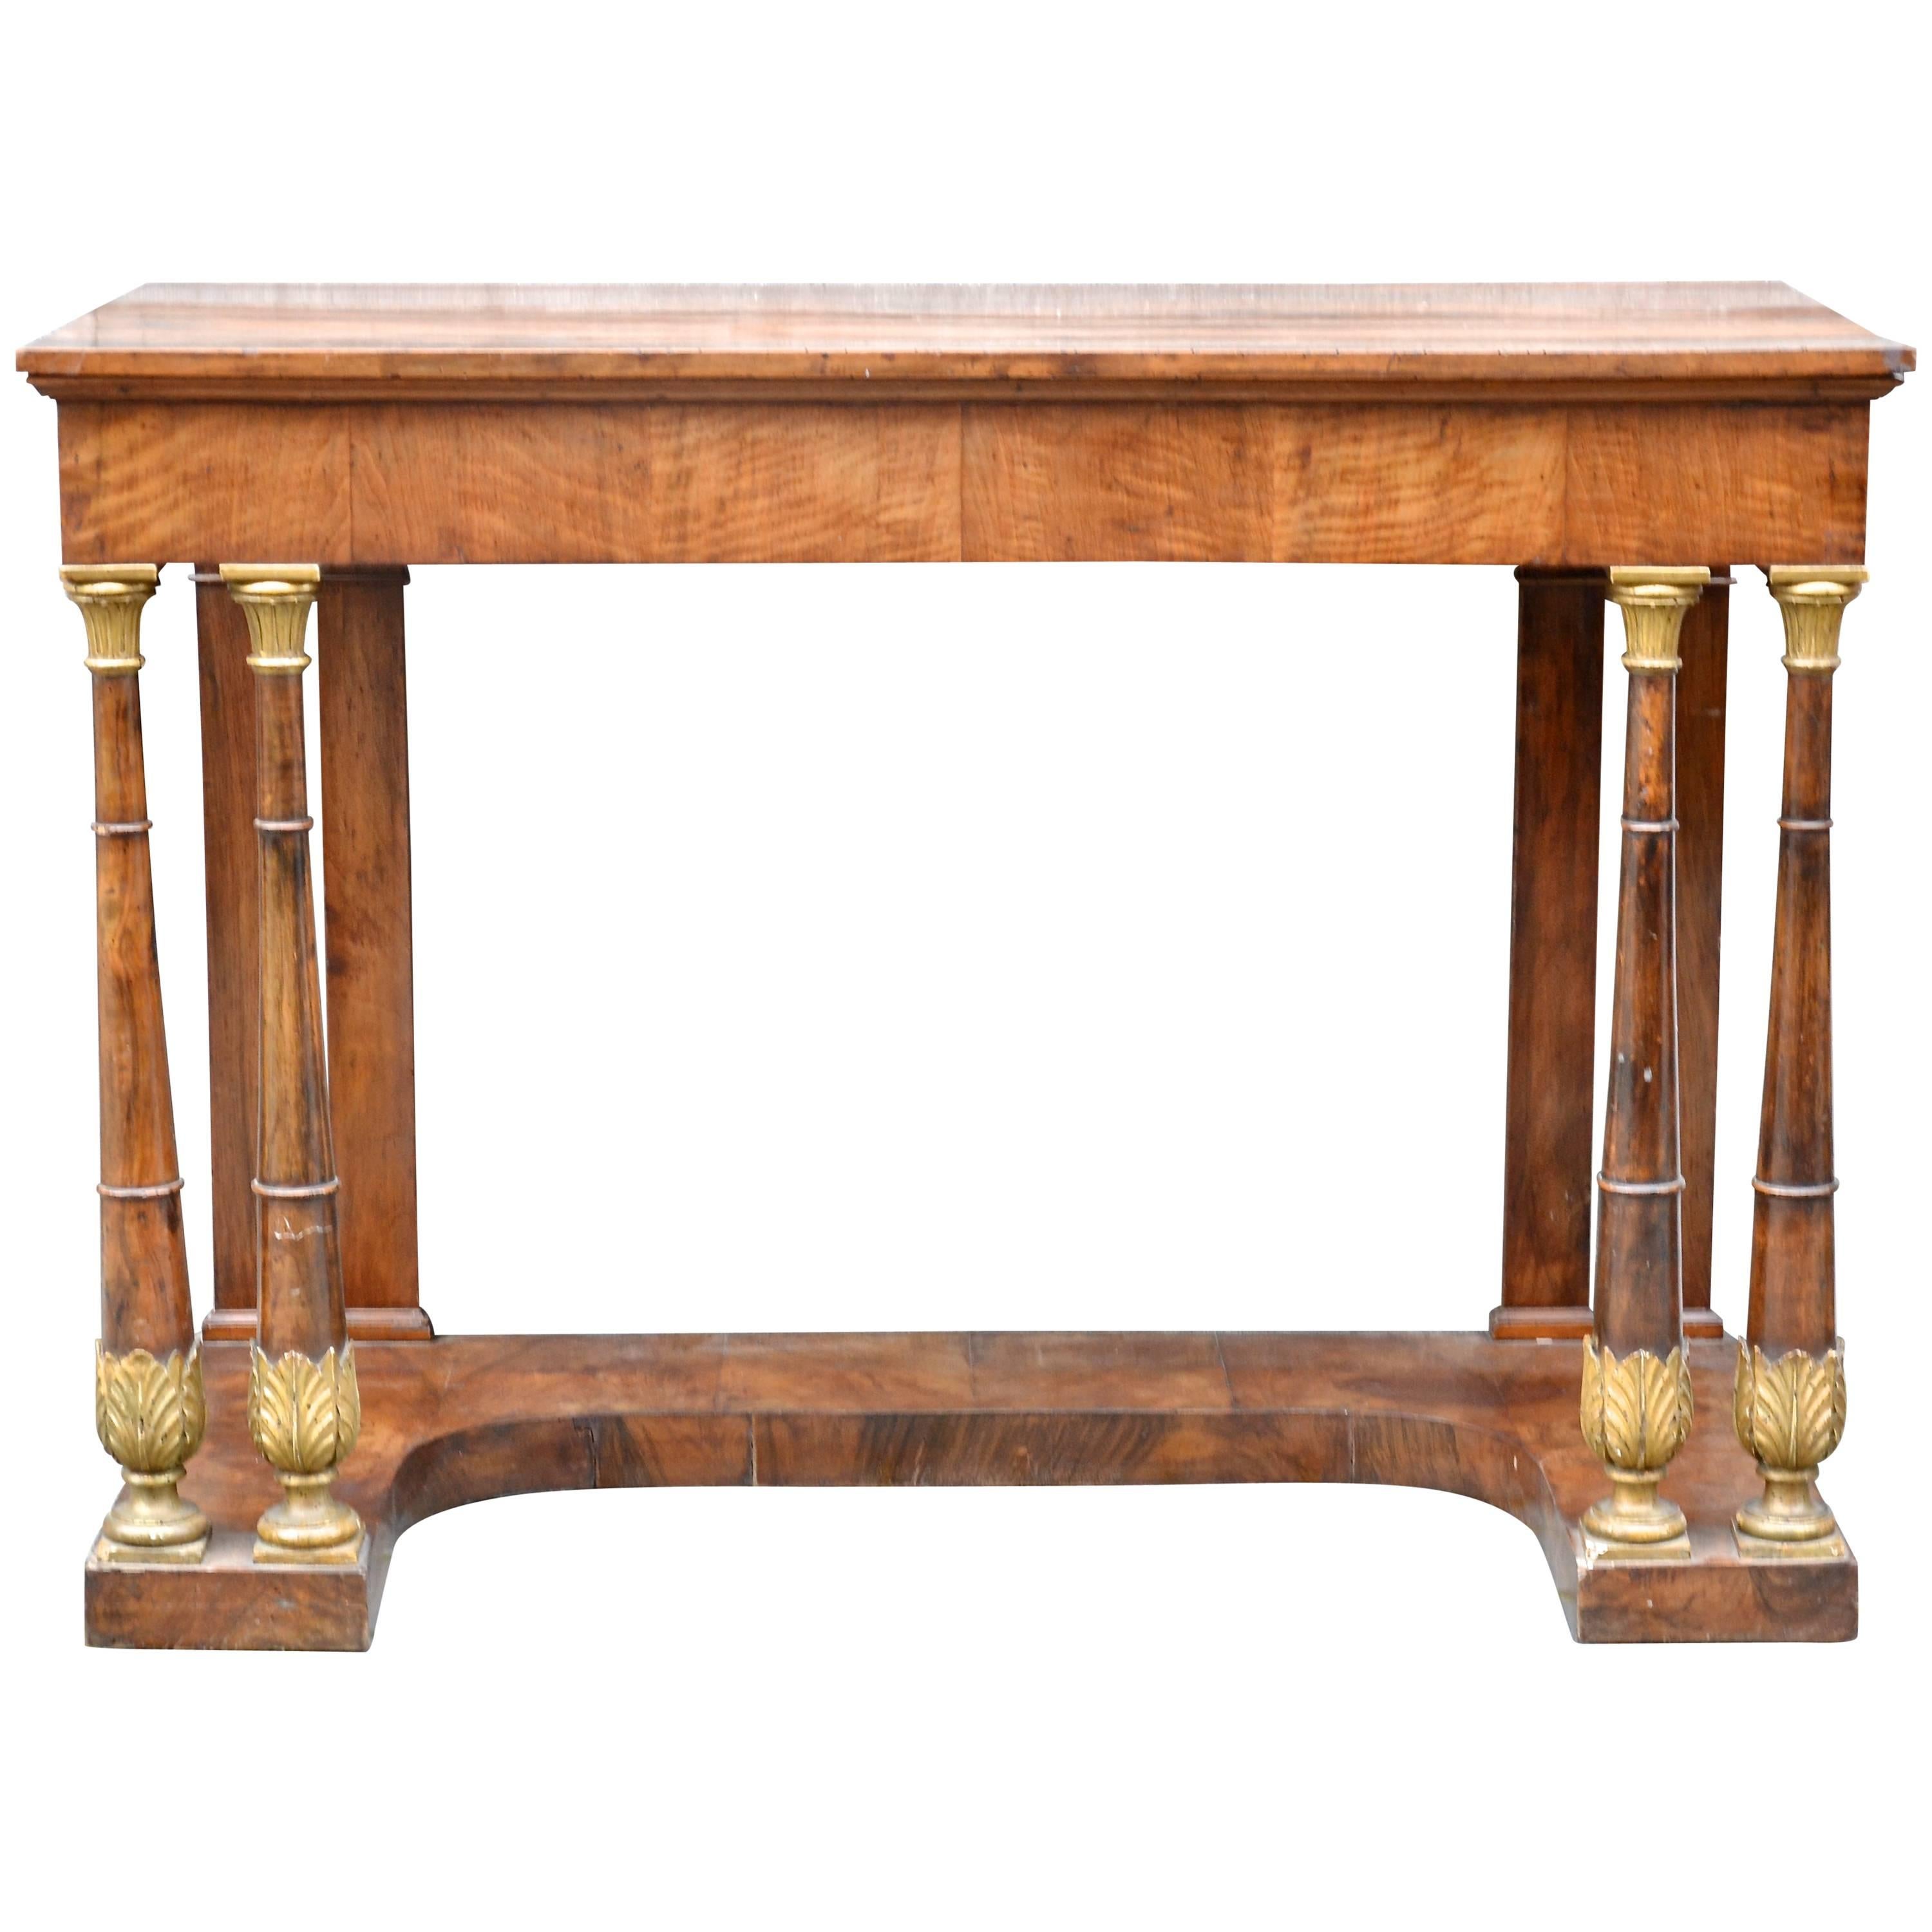 Early 19th Century Tuscan Console Table In Walnut